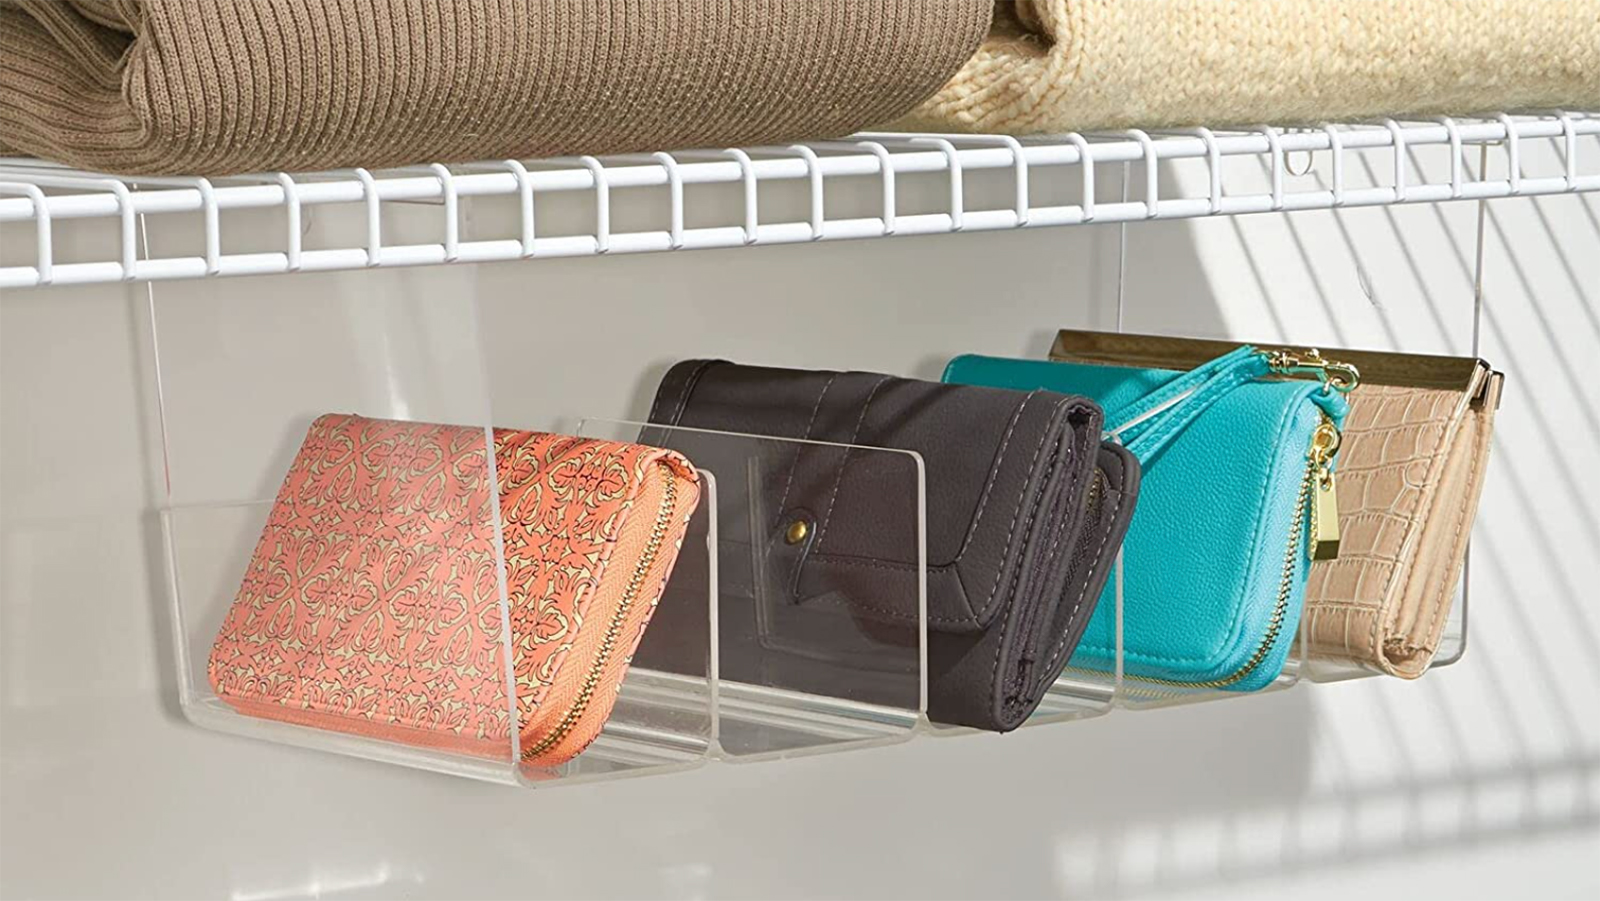 20 S To Organize Your Luggage, Clear Storage Boxes For Purses